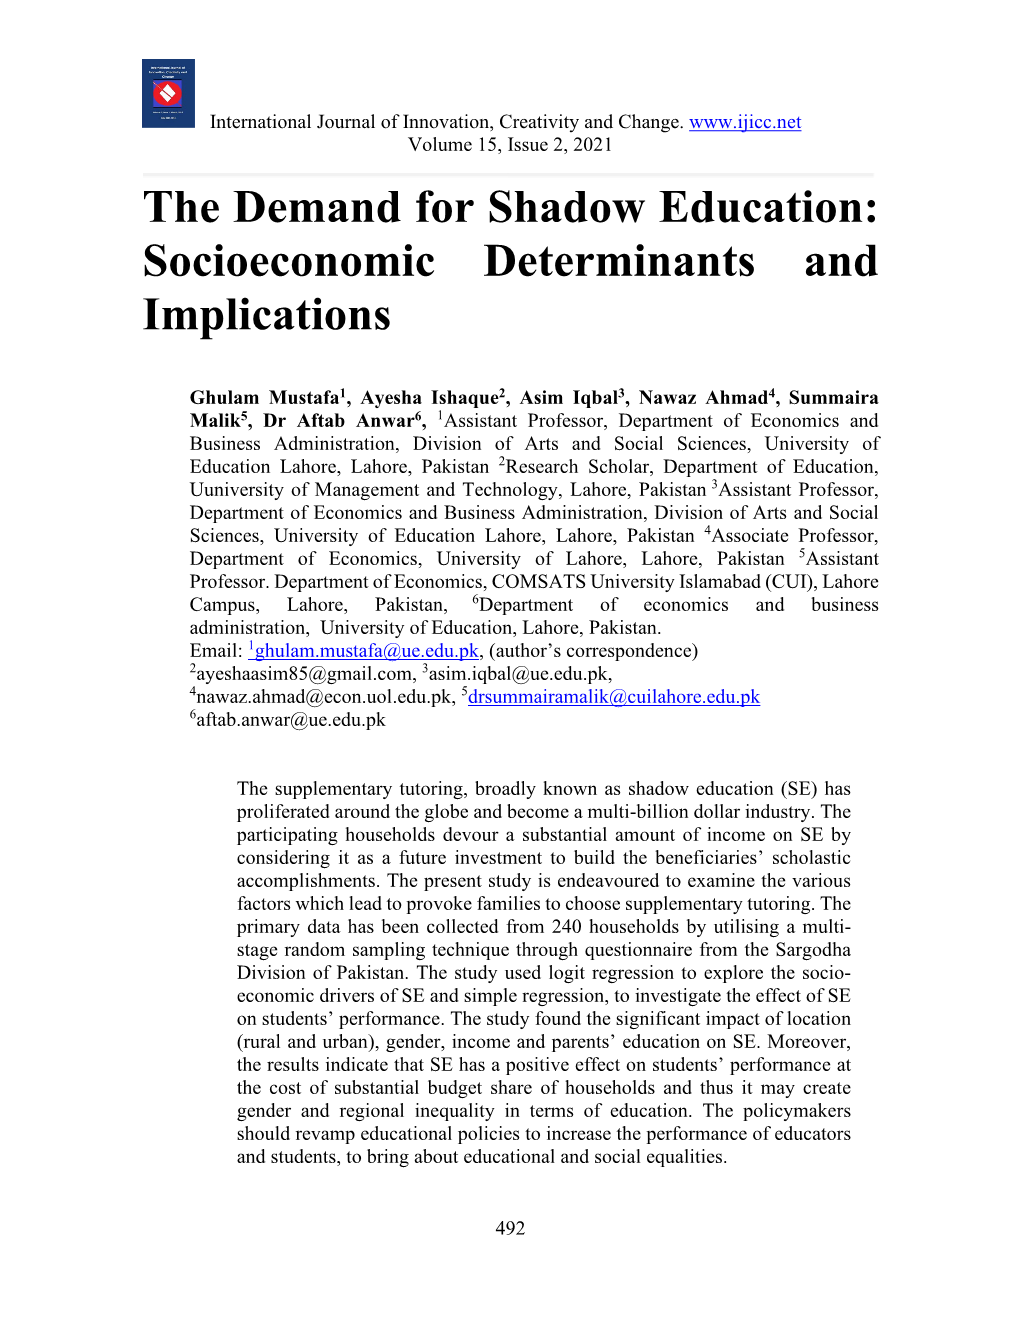 The Demand for Shadow Education: Socioeconomic Determinants and Implications